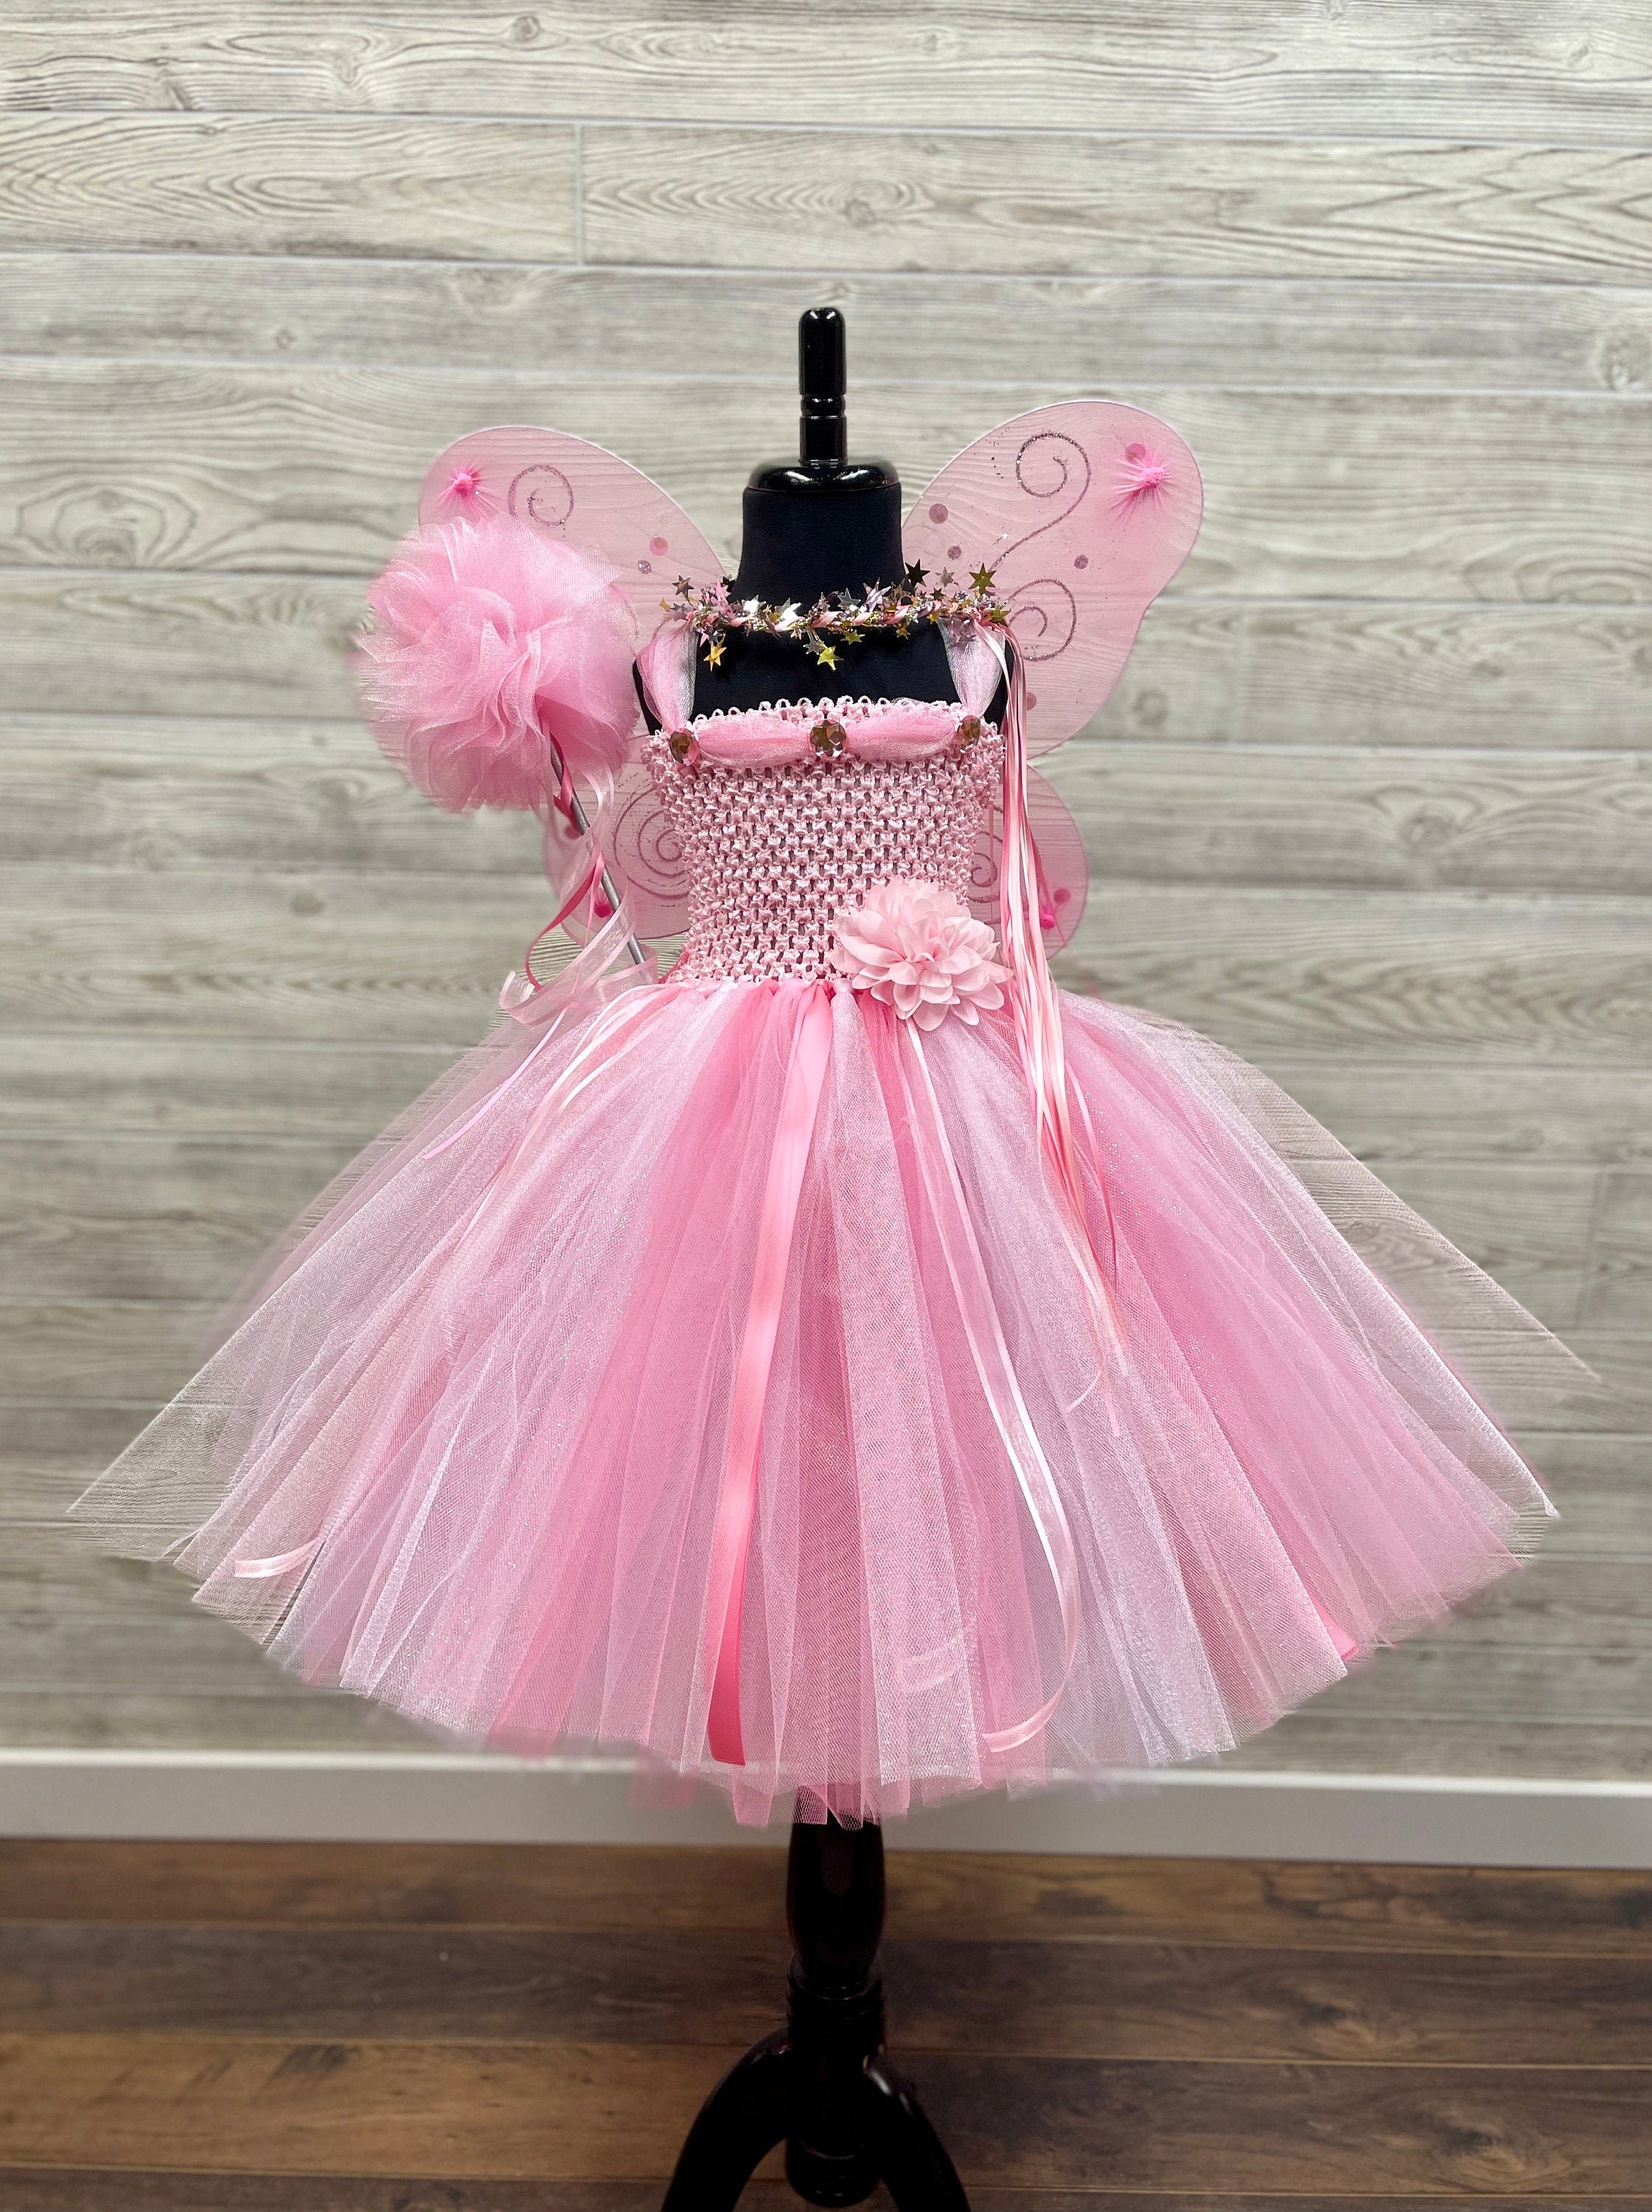 Bright Pink Fairy Princess Costume Princess Tutu Dress With Crown, Wand,  Wings Fairy Princess Birthday Fairy Costume for Girls Dress Up - Etsy